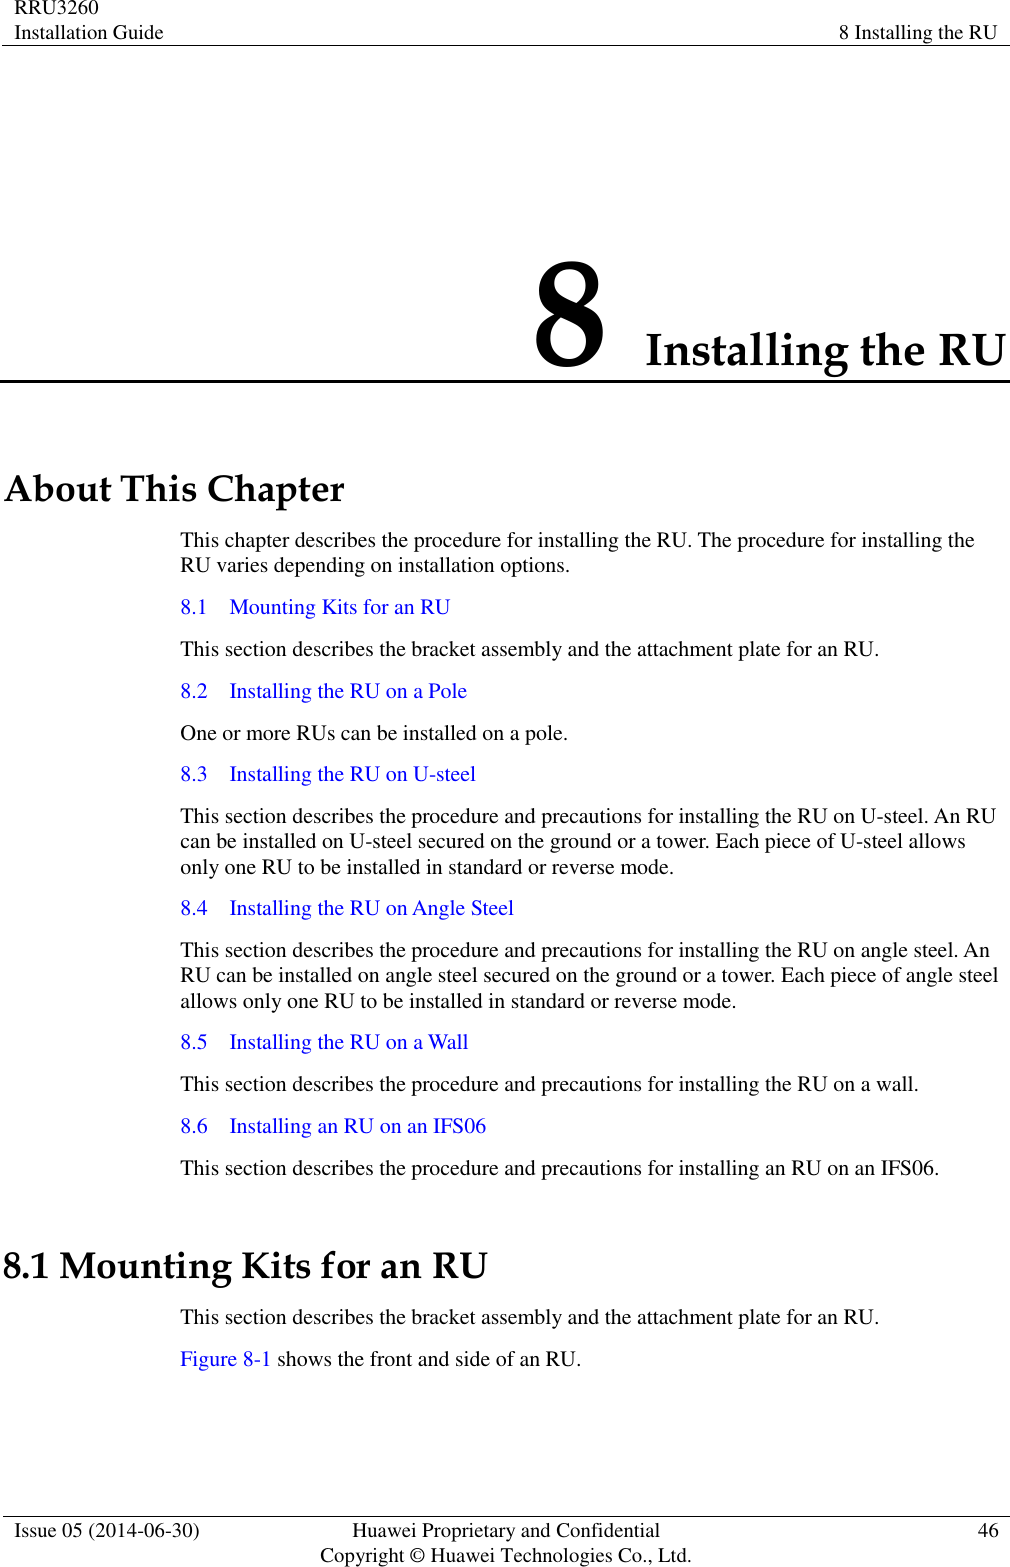 RRU3260 Installation Guide 8 Installing the RU  Issue 05 (2014-06-30) Huawei Proprietary and Confidential                                     Copyright © Huawei Technologies Co., Ltd. 46  8 Installing the RU About This Chapter This chapter describes the procedure for installing the RU. The procedure for installing the RU varies depending on installation options. 8.1    Mounting Kits for an RU This section describes the bracket assembly and the attachment plate for an RU. 8.2    Installing the RU on a Pole One or more RUs can be installed on a pole. 8.3    Installing the RU on U-steel This section describes the procedure and precautions for installing the RU on U-steel. An RU can be installed on U-steel secured on the ground or a tower. Each piece of U-steel allows only one RU to be installed in standard or reverse mode. 8.4    Installing the RU on Angle Steel This section describes the procedure and precautions for installing the RU on angle steel. An RU can be installed on angle steel secured on the ground or a tower. Each piece of angle steel allows only one RU to be installed in standard or reverse mode. 8.5    Installing the RU on a Wall This section describes the procedure and precautions for installing the RU on a wall. 8.6    Installing an RU on an IFS06 This section describes the procedure and precautions for installing an RU on an IFS06. 8.1 Mounting Kits for an RU This section describes the bracket assembly and the attachment plate for an RU. Figure 8-1 shows the front and side of an RU. 